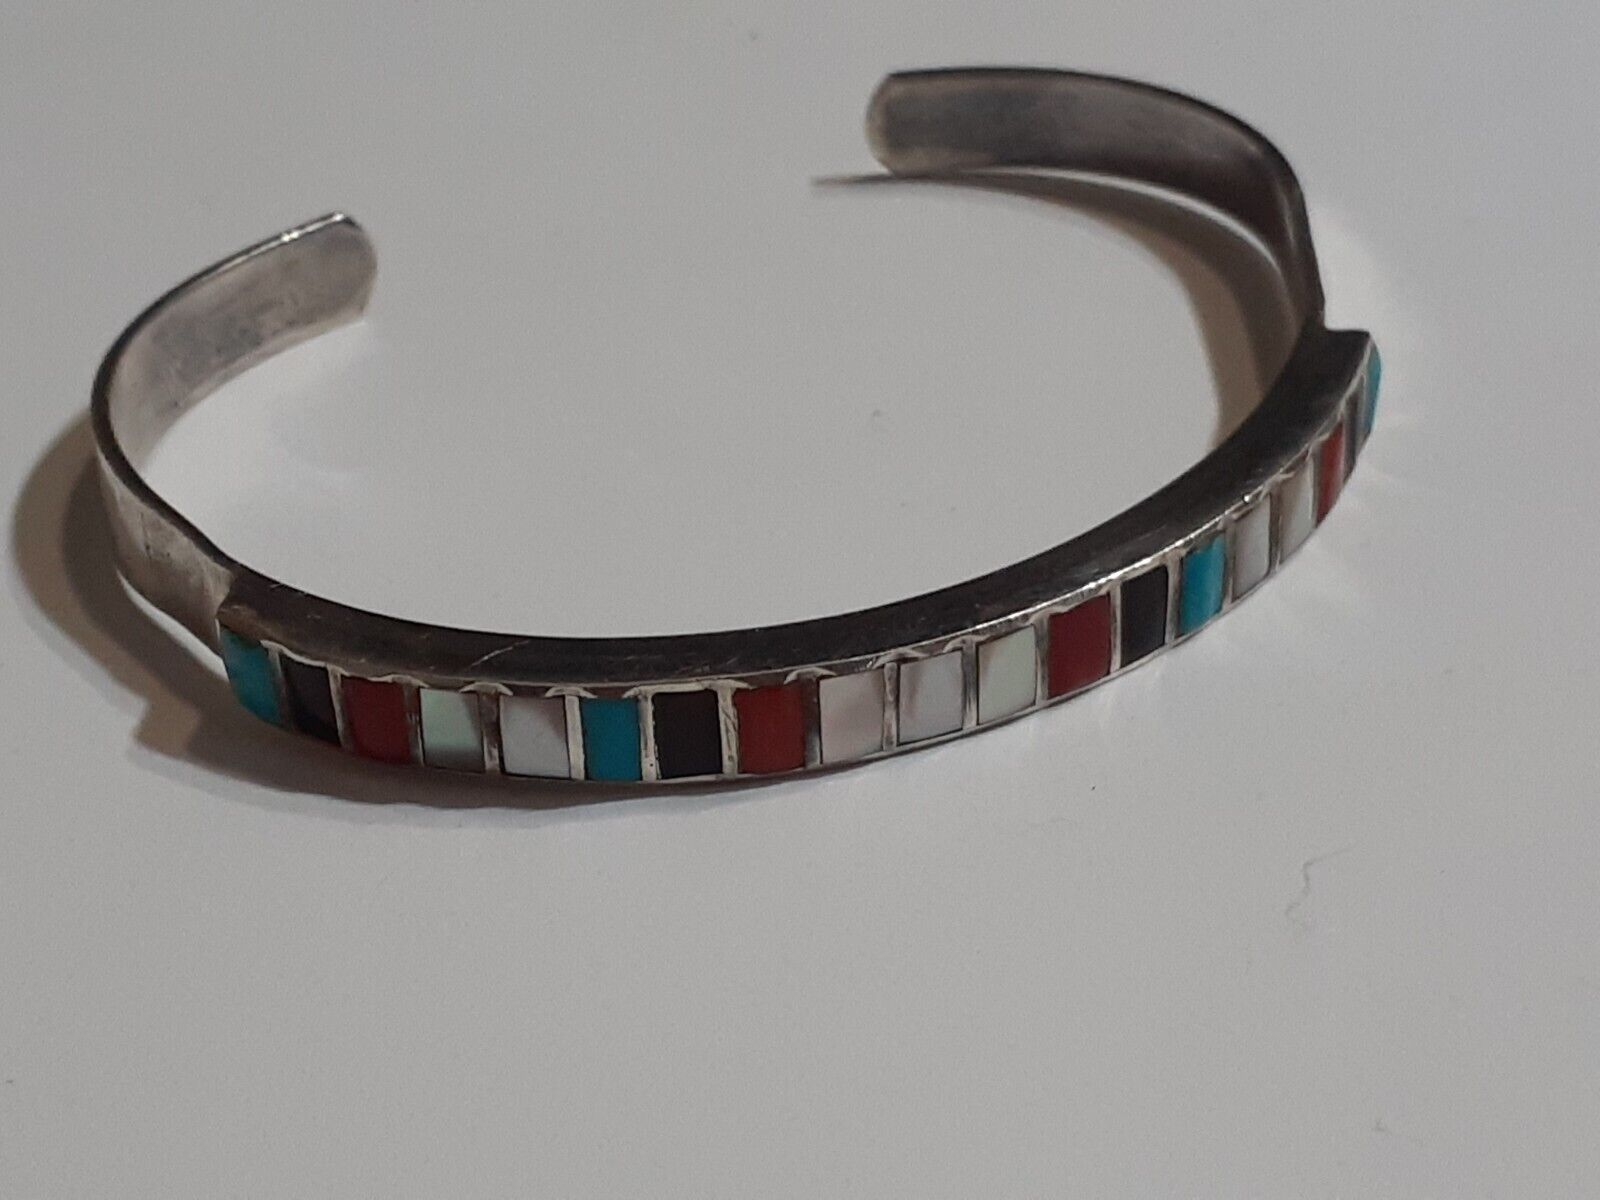 Zuni Or Navajo Multi-Stone Inlay Sterling Silver 925 Turquoise Coral Bracelet